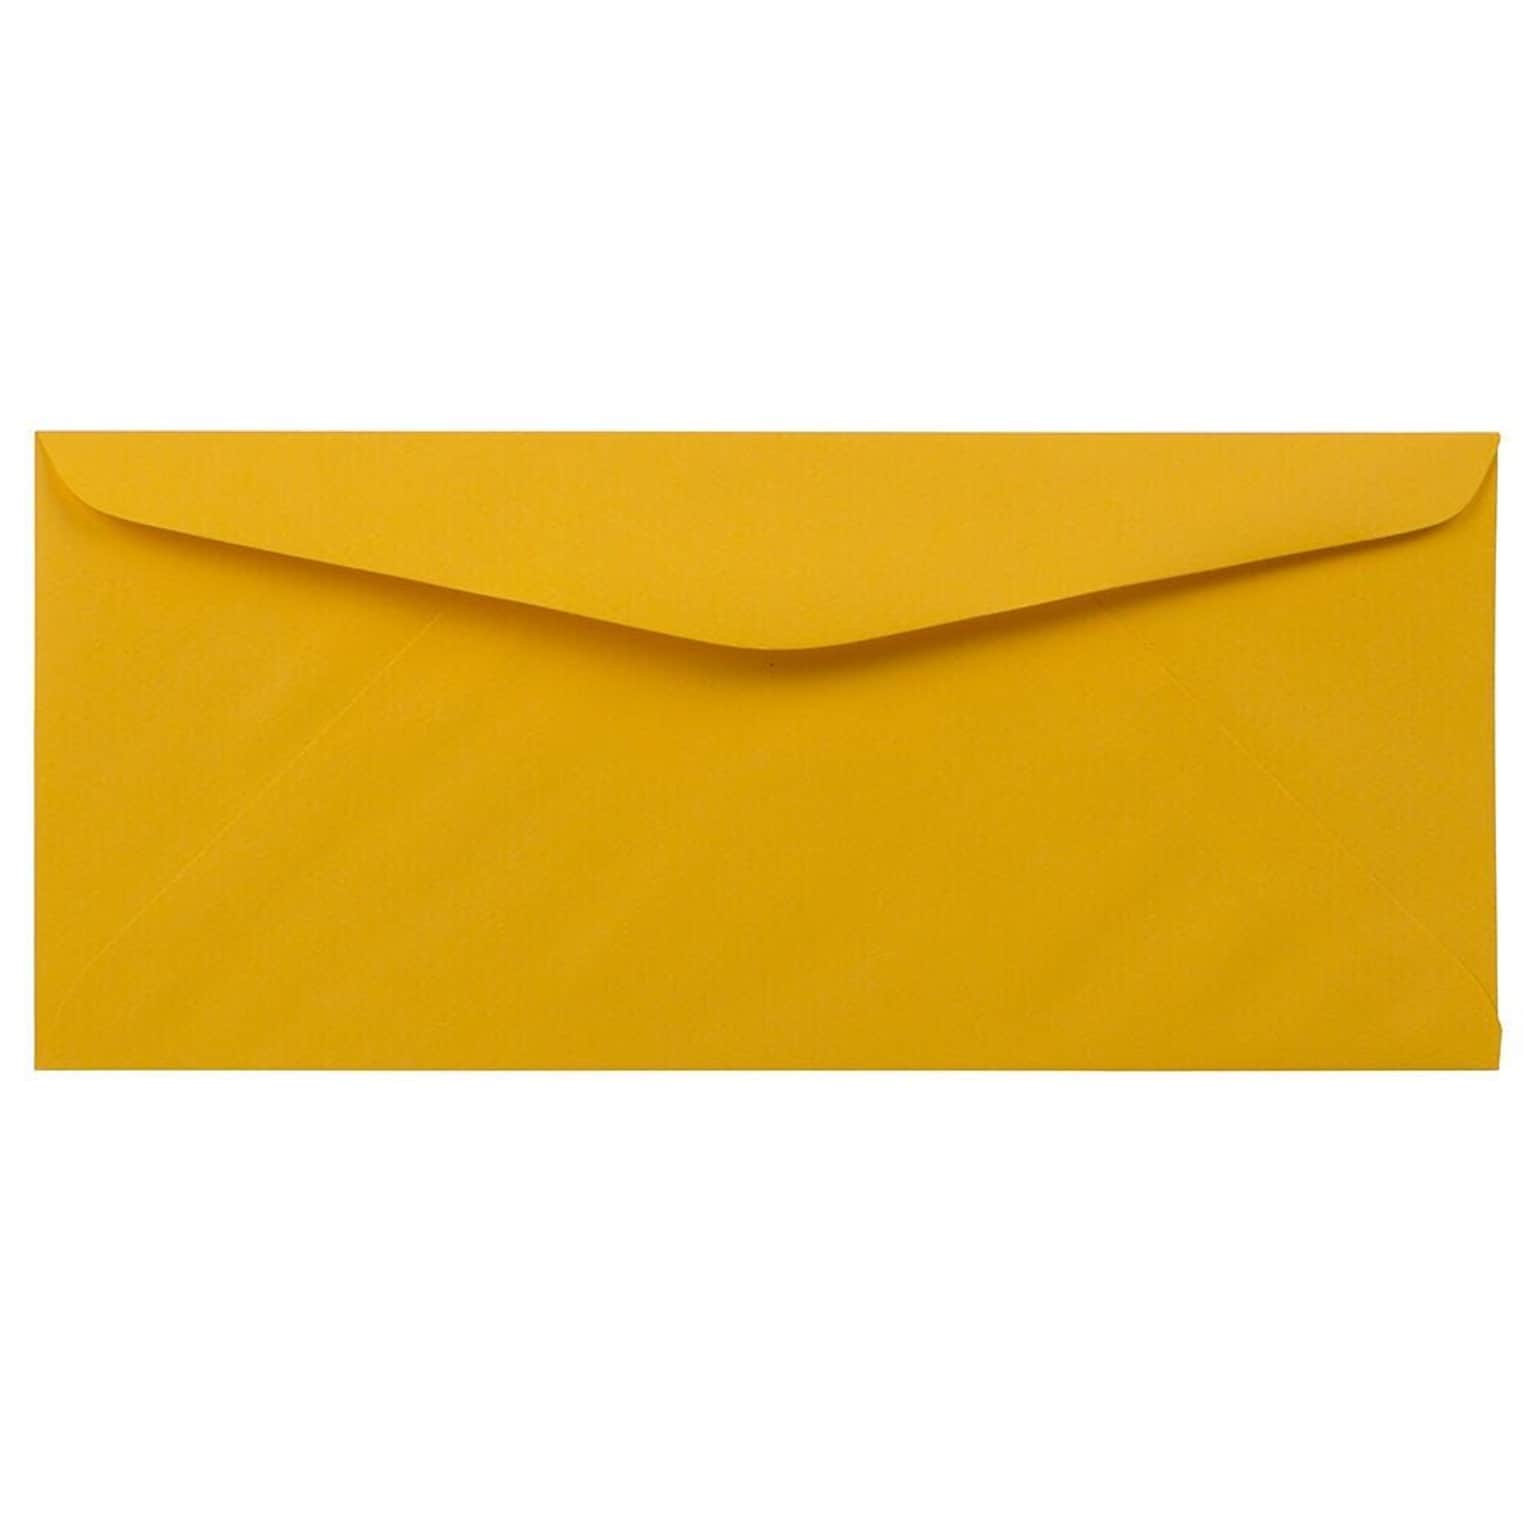 JAM Paper #9 Business Envelope, 3 7/8 x 8 7/8, Gold Yellow, 100/Pack (1536427D)